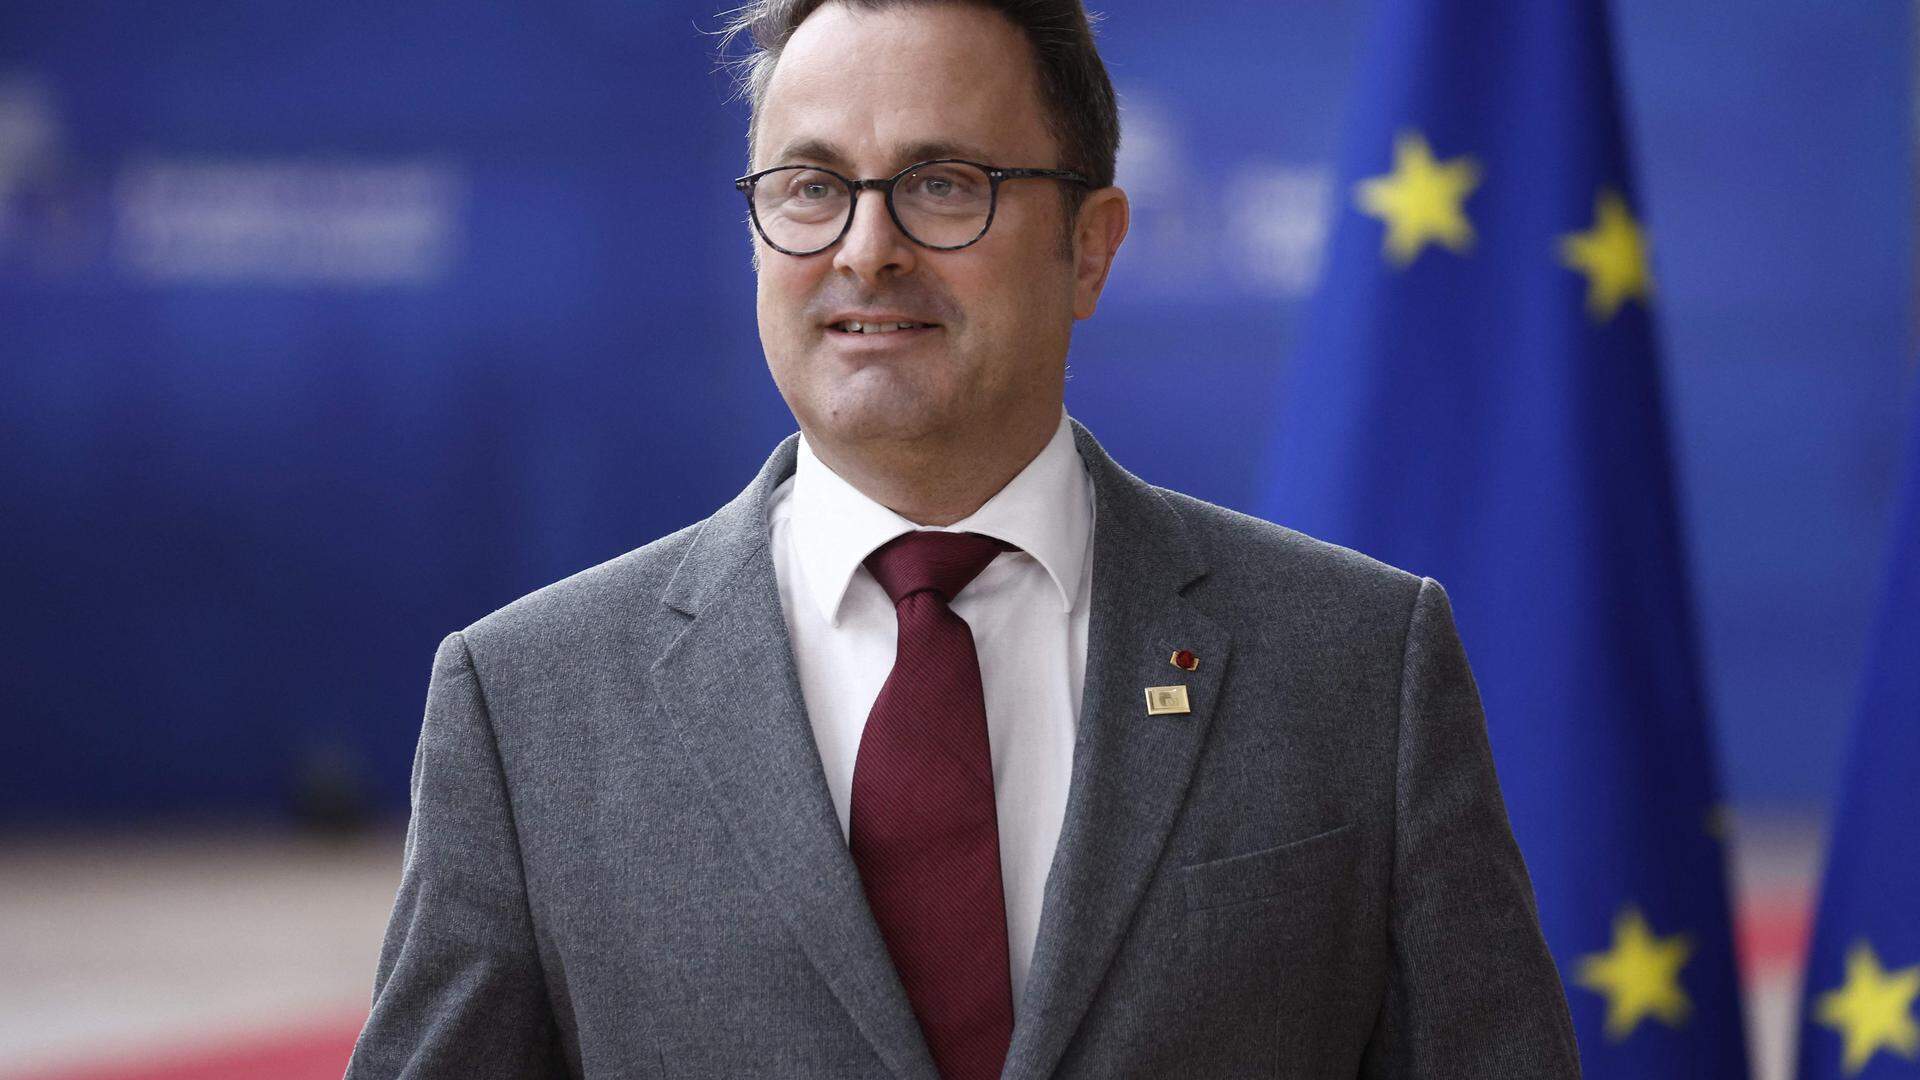 Luxembourg's Prime Minister Xavier Bettel arrives for a EU Summit, at the EU headquarters in Brussels, on March 23, 2023. - The two-day summit of the 27 European Union leaders in Brussels aims to build on previous European Council meetings where EU leaders will discuss the latest developments including continued EU support for Ukraine, the economy, energy, and migration. (Photo by Kenzo TRIBOUILLARD / AFP)